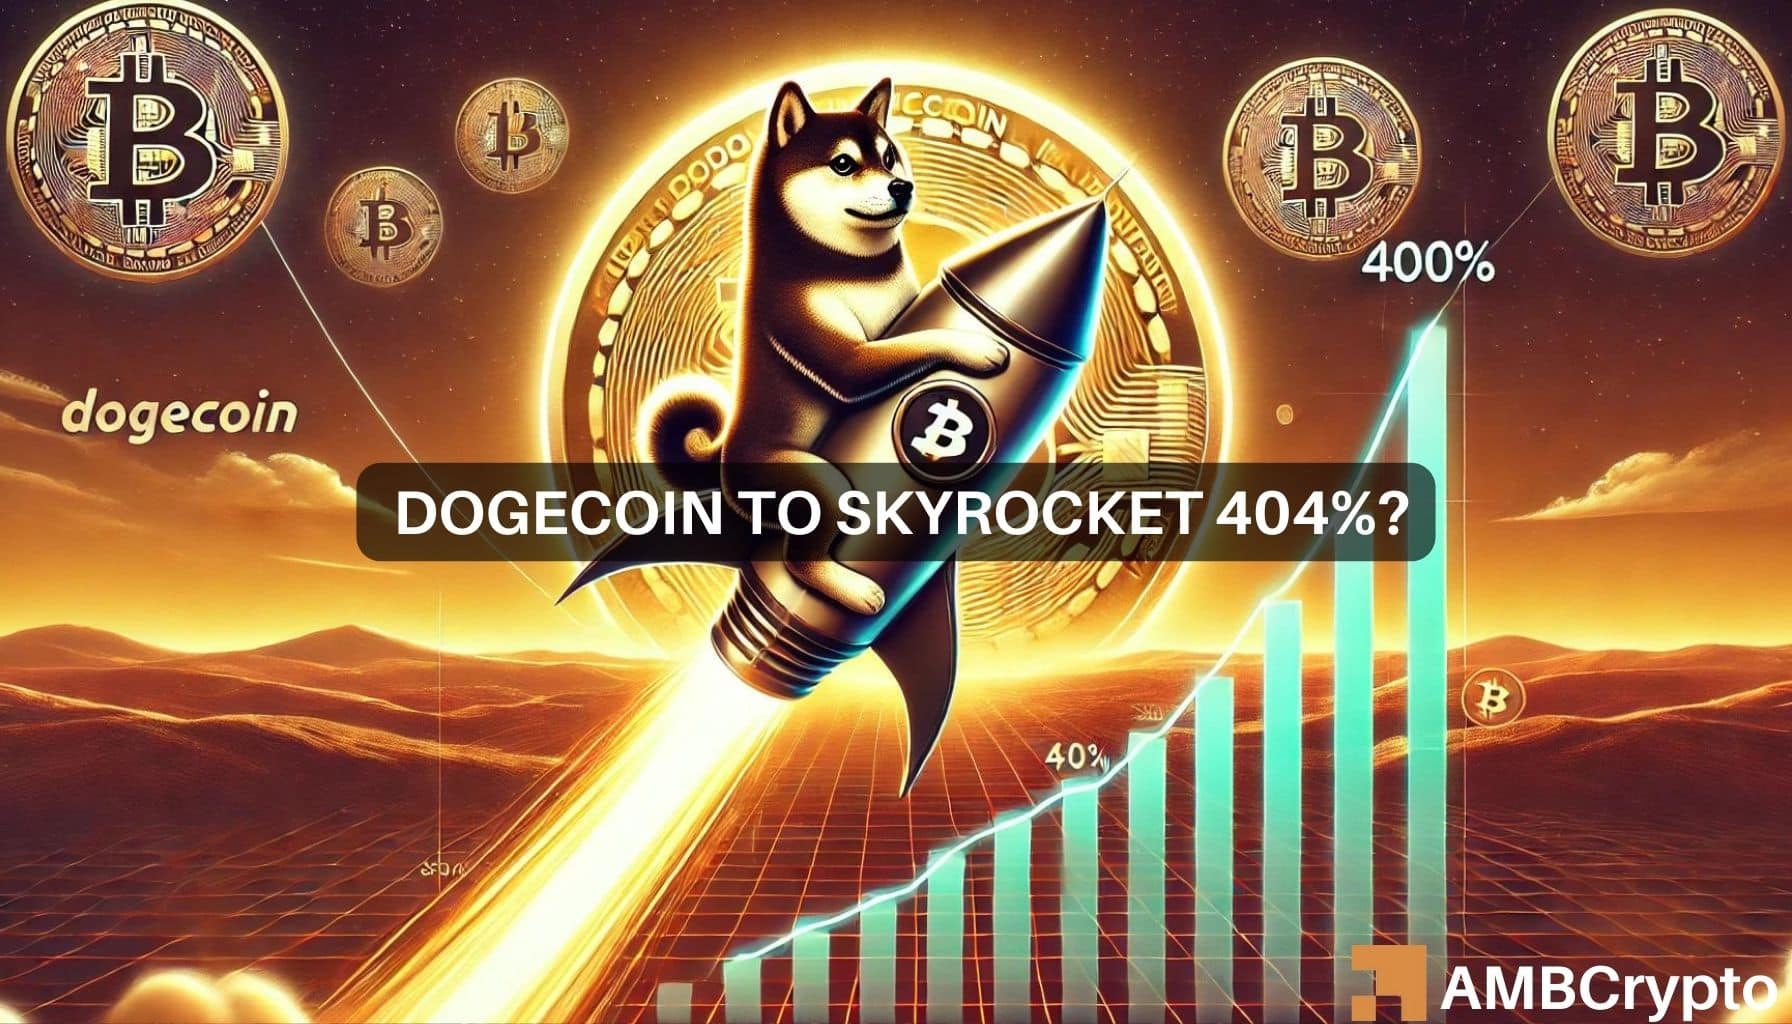 Dogecoin to hit $0.6533? Analysts predict a 404% surge!